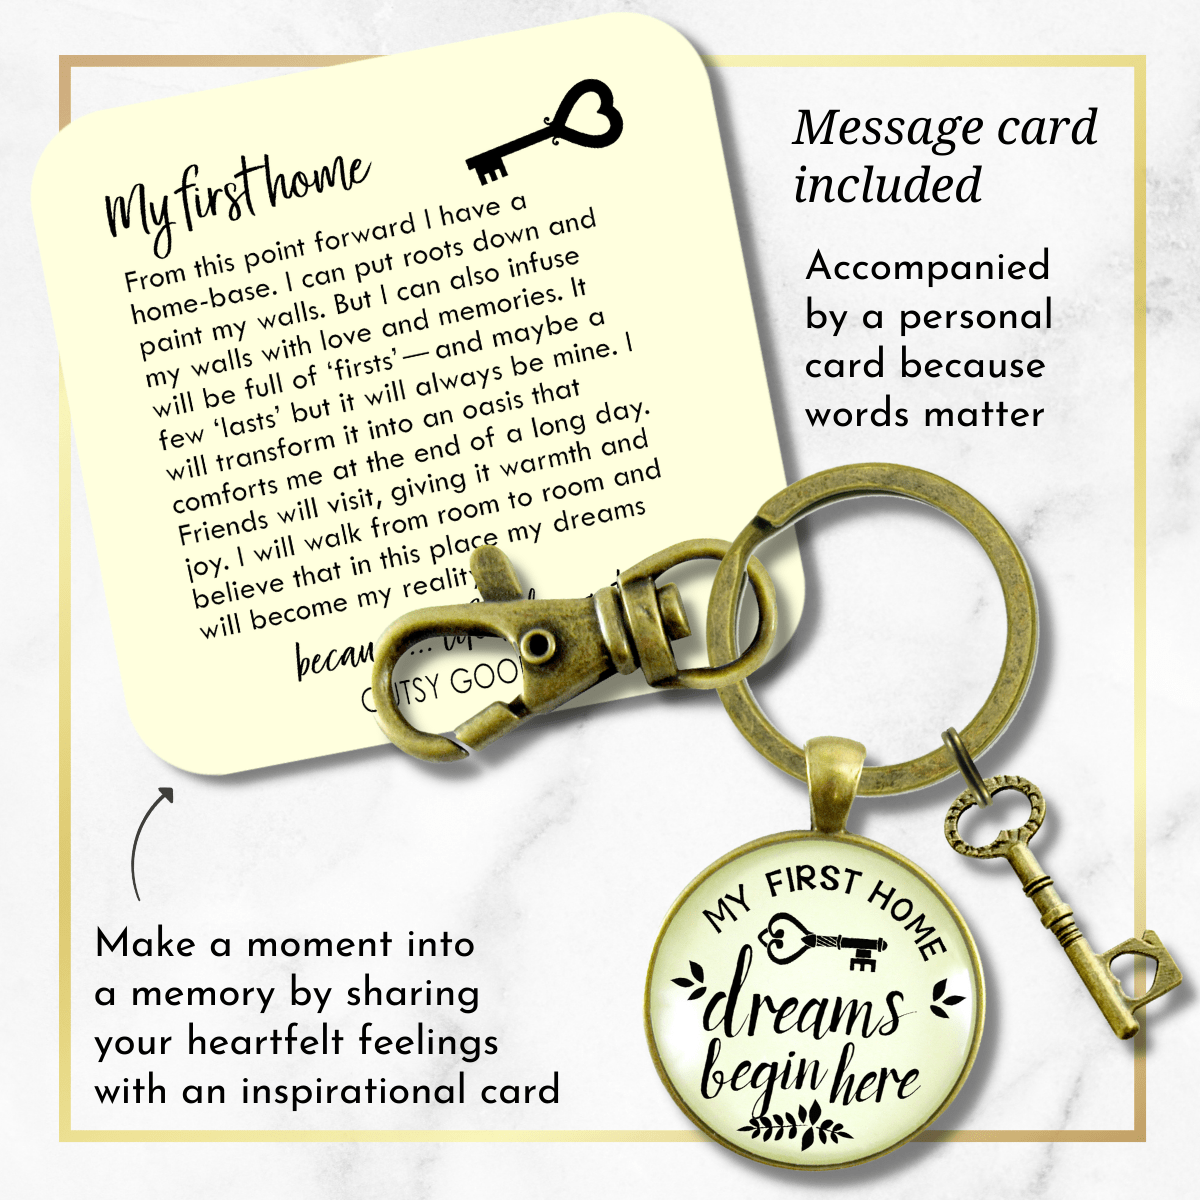 My First Home Keychain Dreams Begin Here Homeowner Home Buyers Gift  Keychain - Unisex - Gutsy Goodness Handmade Jewelry